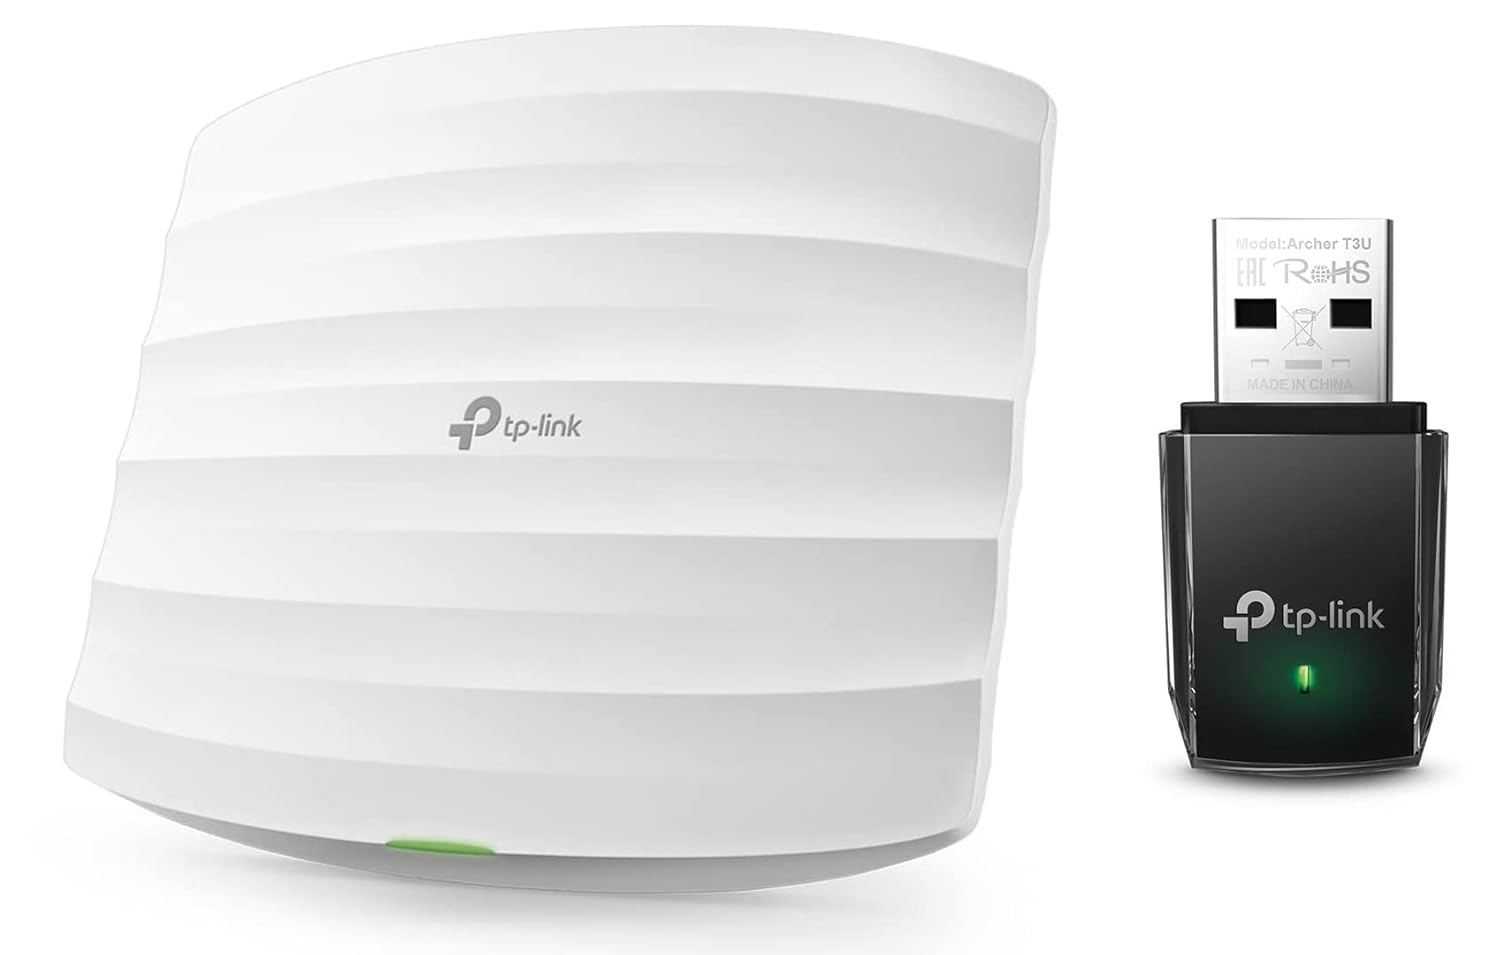 TP-Link 300Mbps Wireless N Ceiling Mount Access Point – Supports Passive PoE, Free PoE Injector & AC1300 USB WiFi Adapter (Archer T3U)-2.4G/5G Dual Band Mini Wireless Network Adapter for PC Desktop